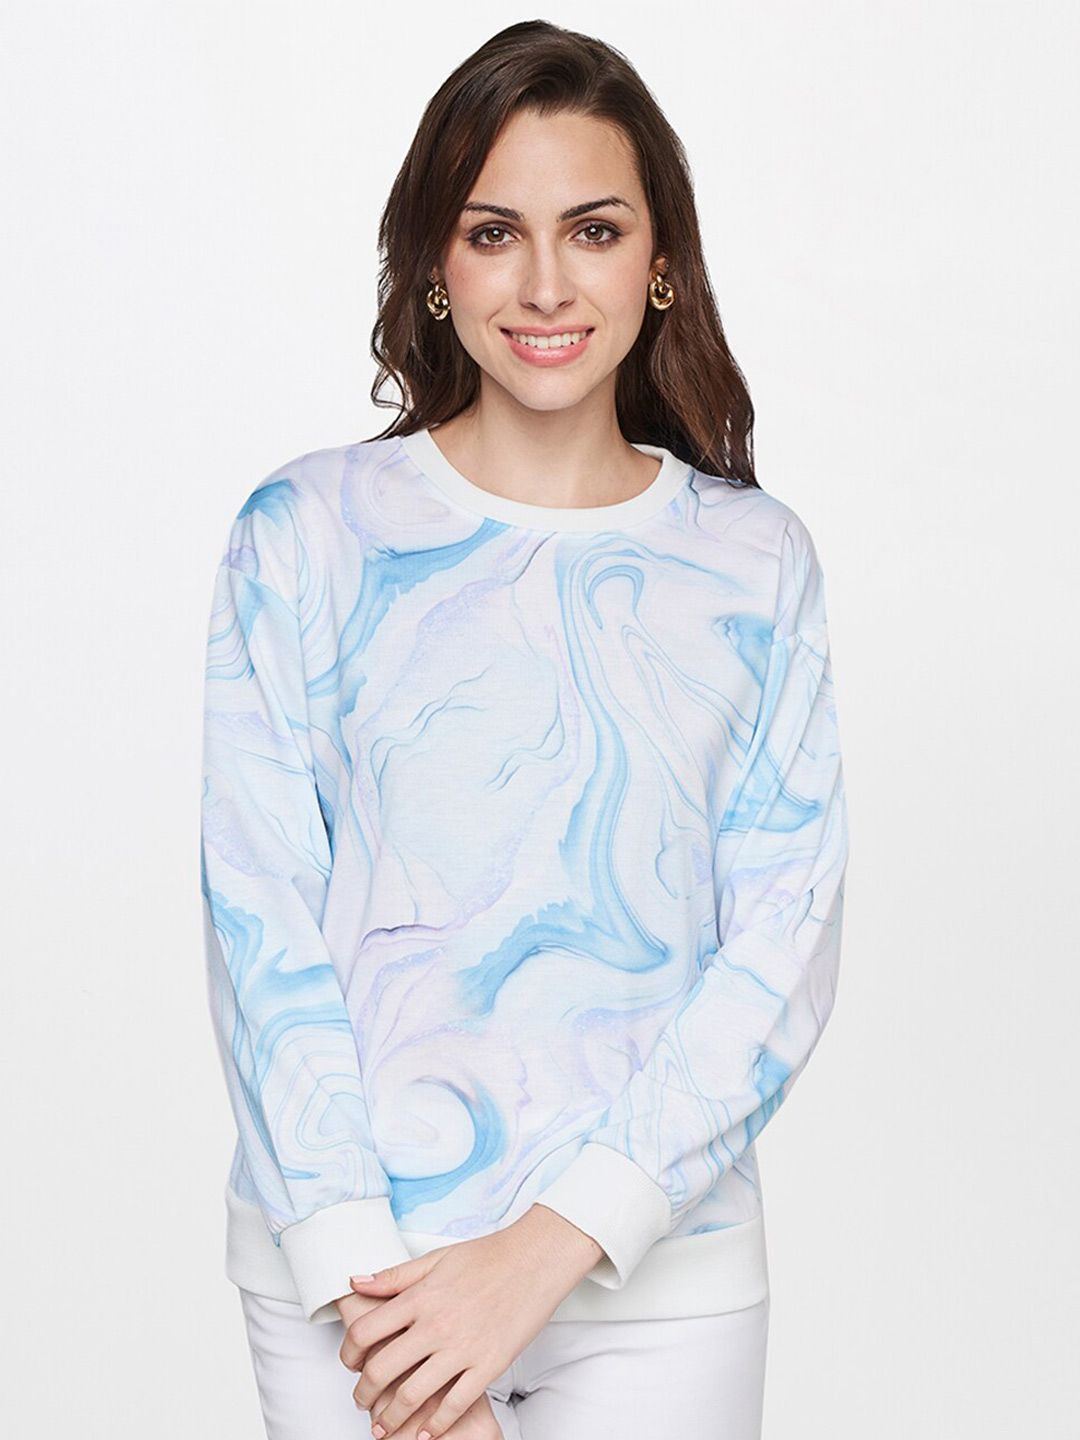 AND White & Blue Tie and Dye Top Price in India